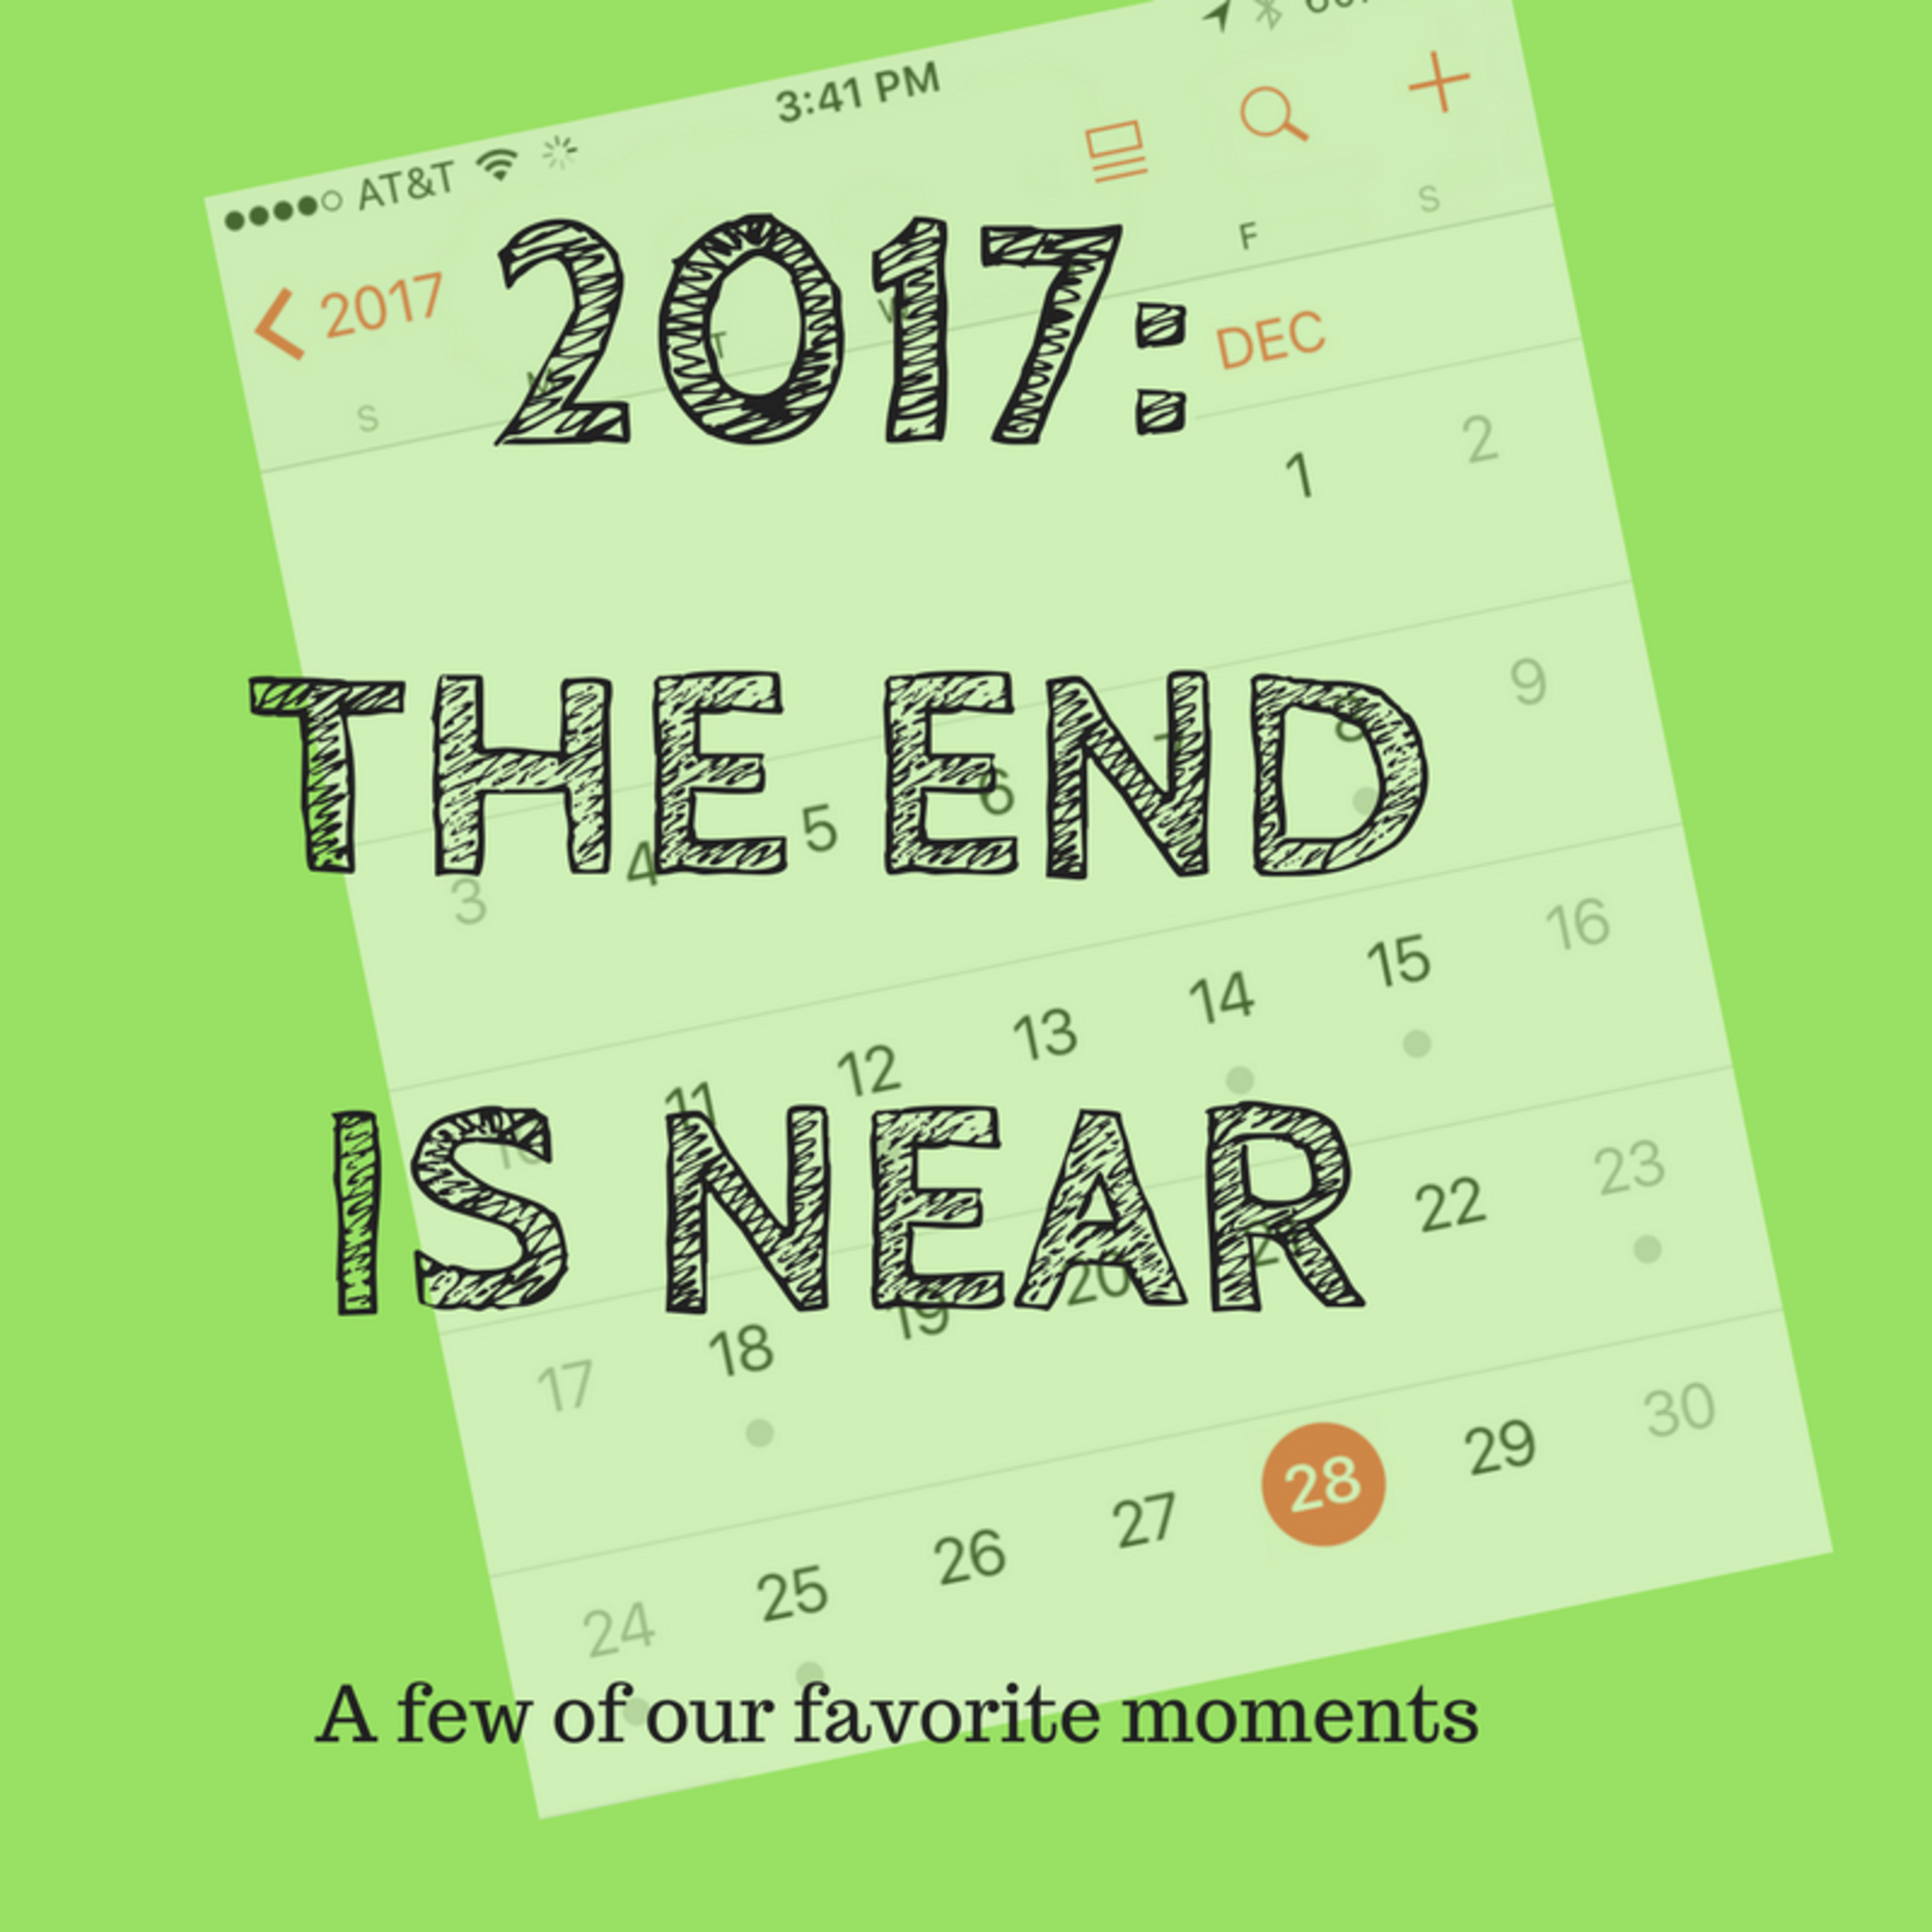 2017: THE END IS NEAR ... a few of our favorite moments